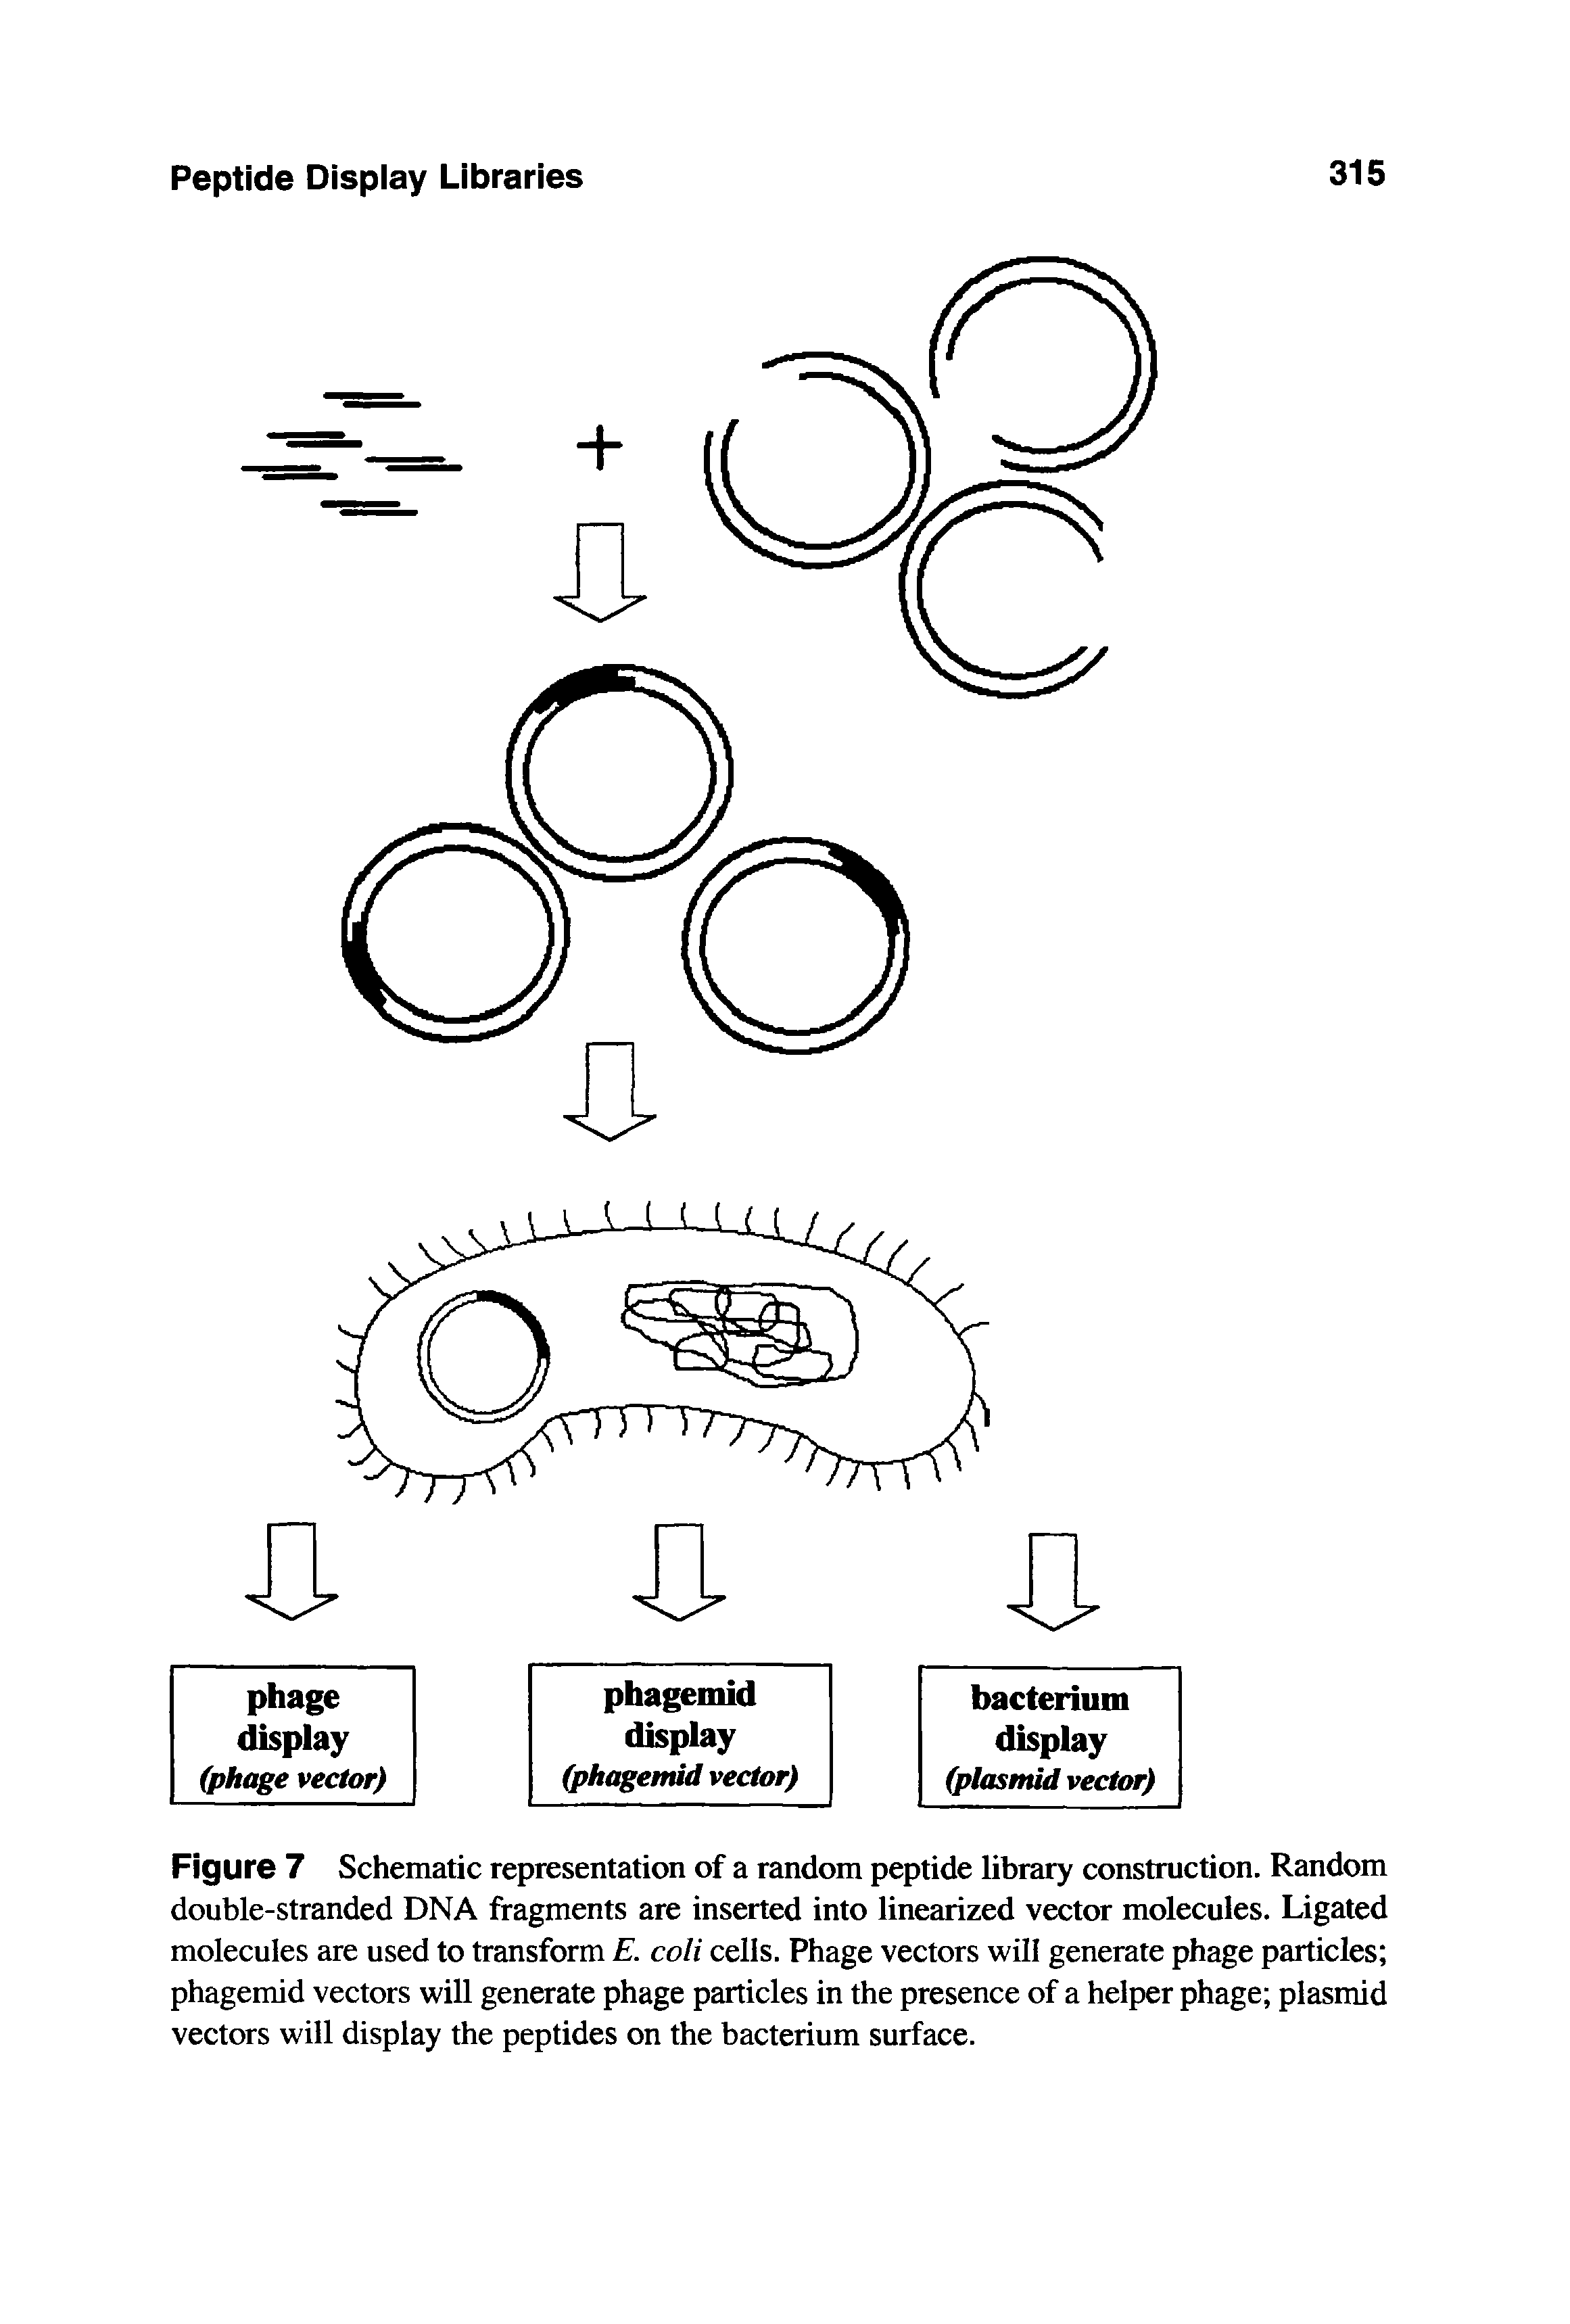 Figure 7 Schematic representation of a random peptide library construction. Random double-stranded DNA fragments are inserted into linearized vector molecules. Ligated molecules are used to transform E. coli cells. Phage vectors will generate phage particles phagemid vectors will generate phage particles in the presence of a helper phage plasmid vectors will display the peptides on the bacterium surface.